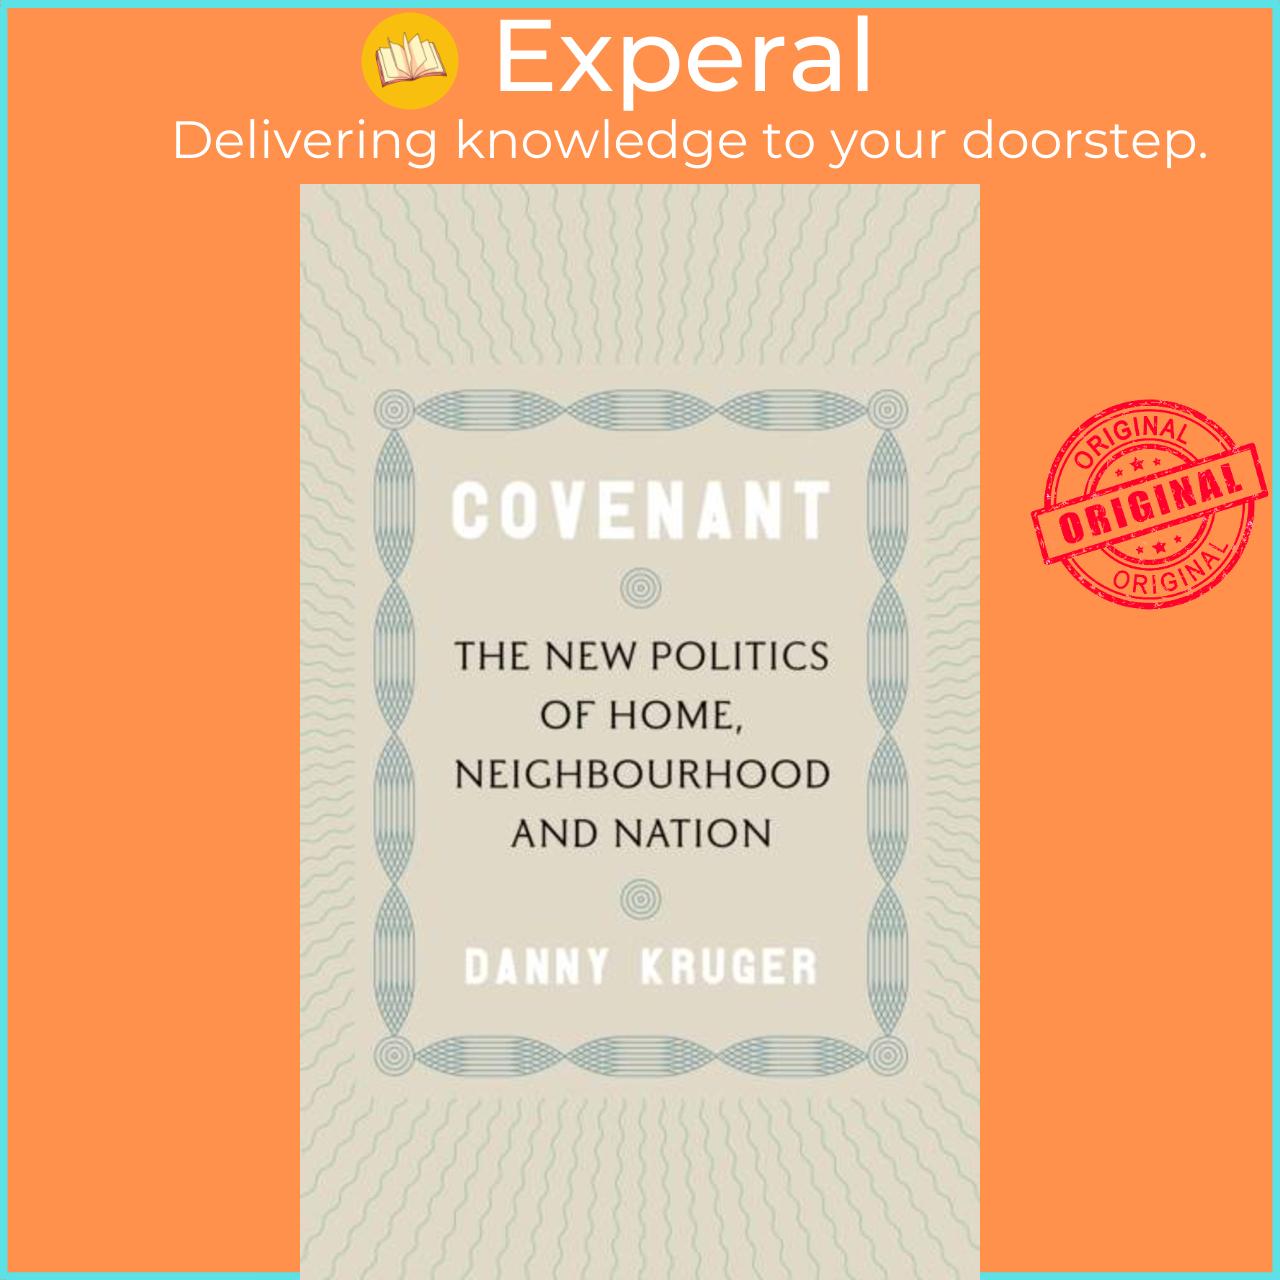 Sách - Covenant - The New Politics of Home, Neighbourhood and Nation by Danny Kruger (UK edition, hardcover)